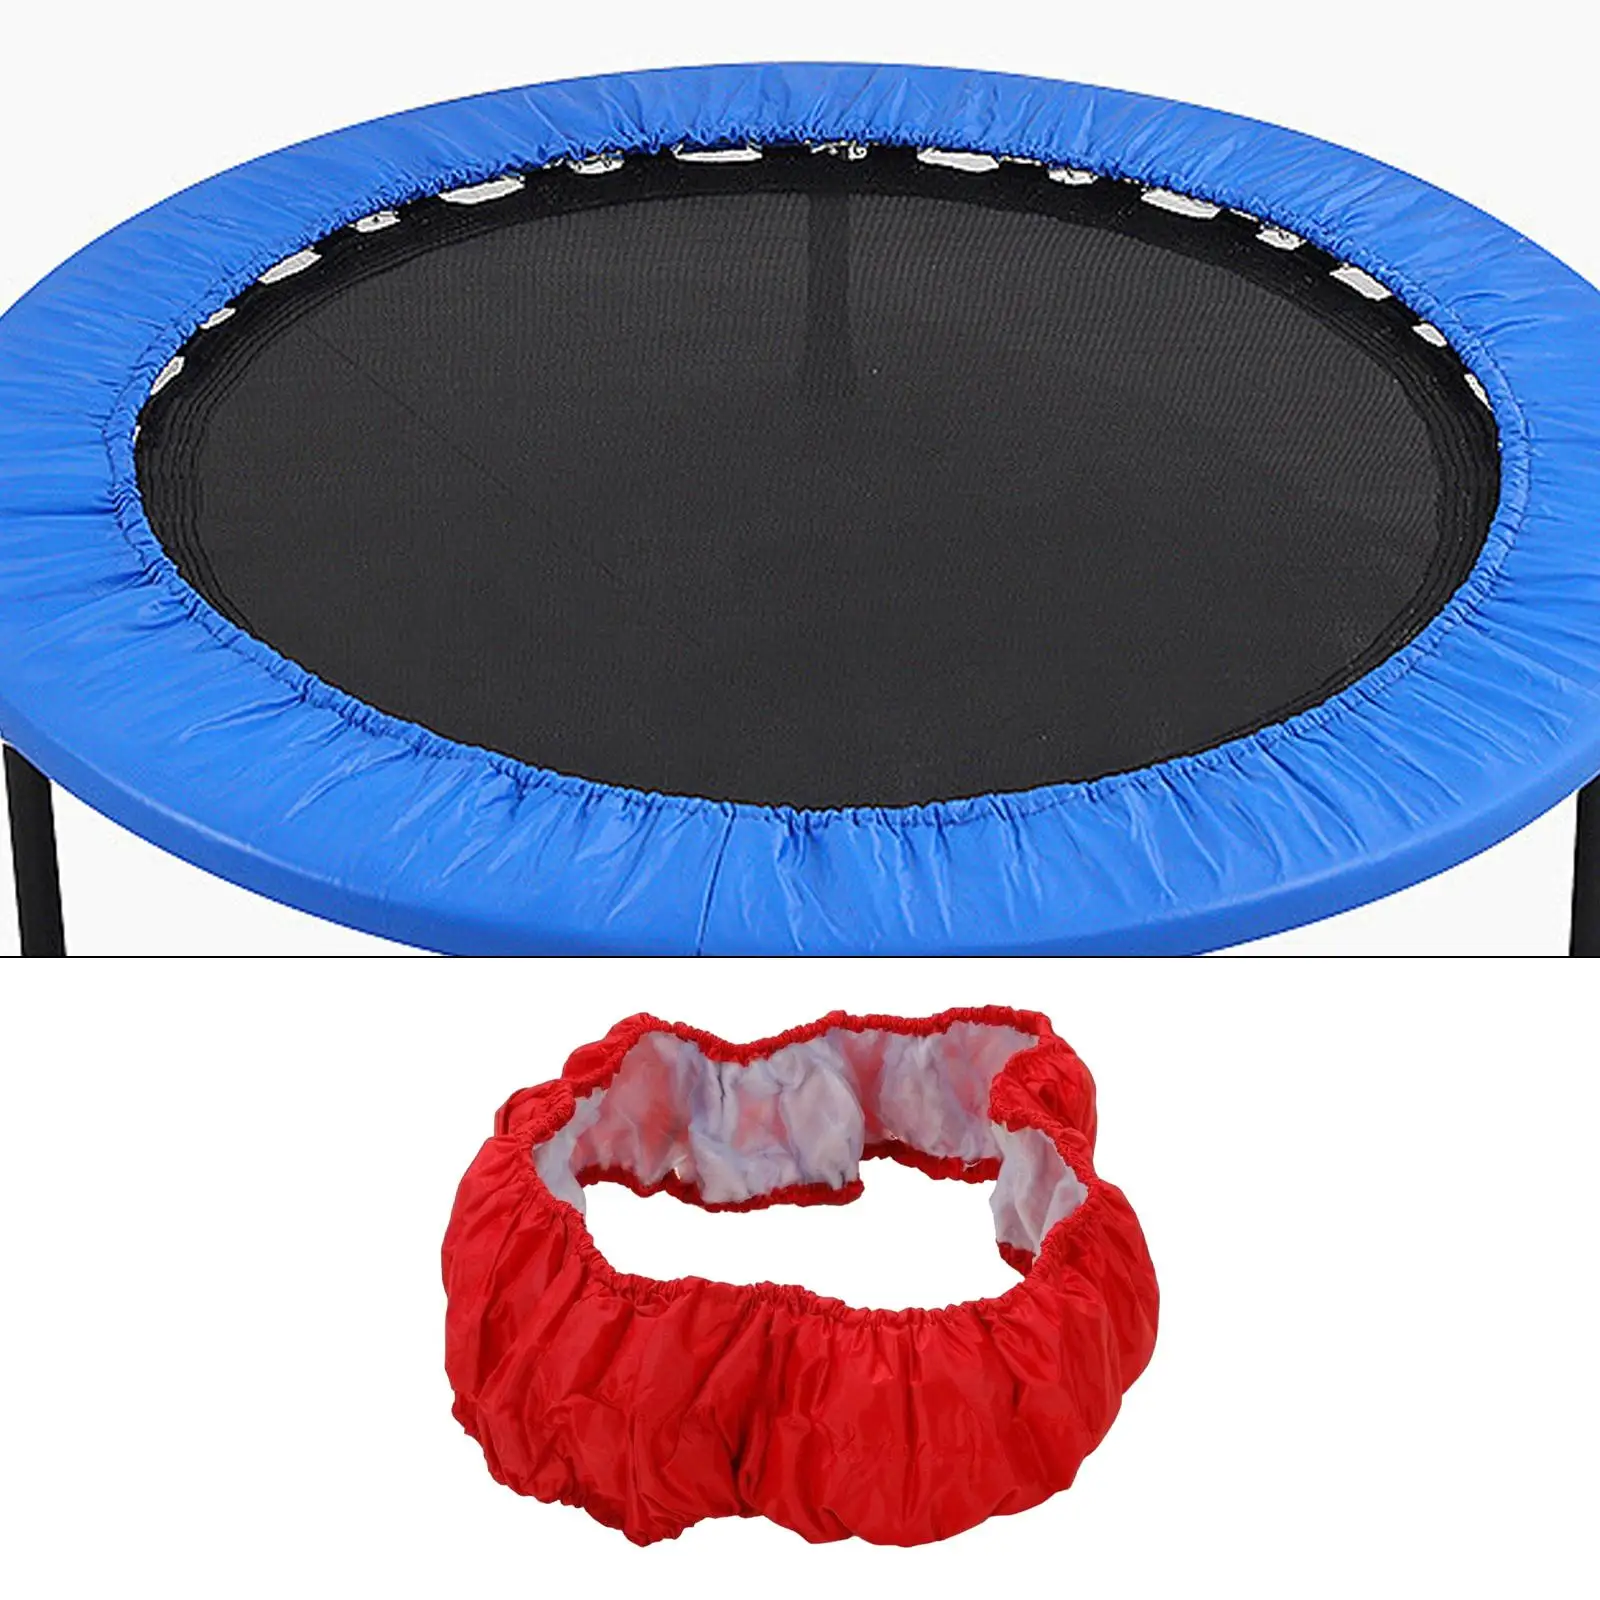 Spring Trampoline Cover for Children, Trampoline Edge Cover, Round Practical